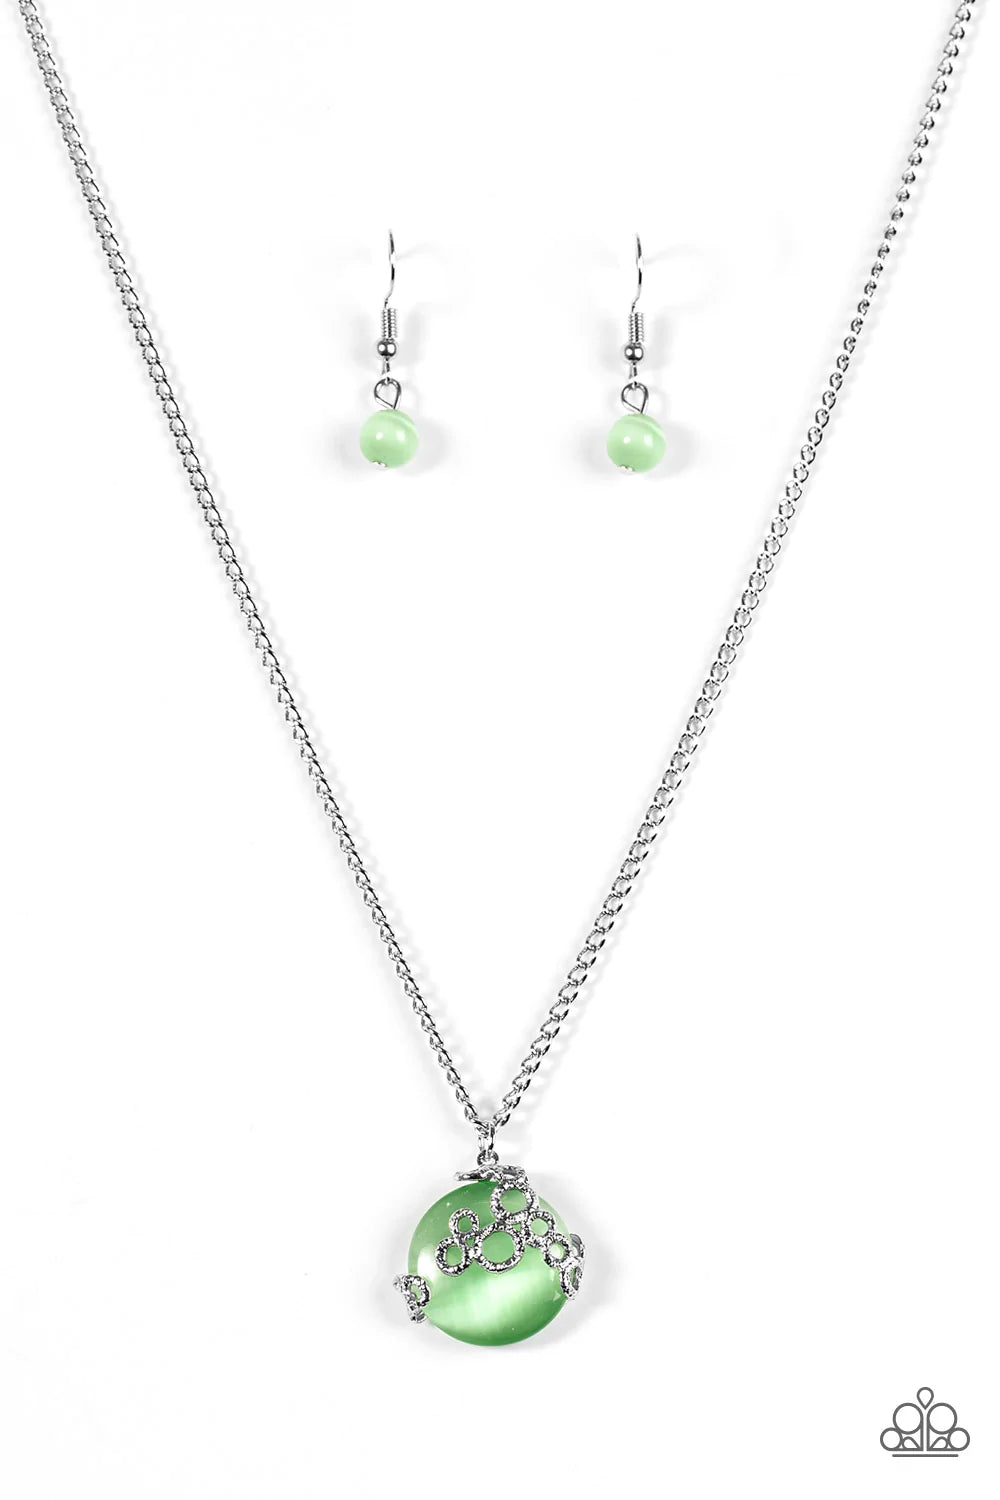 Paparazzi Necklace ~ Bubbles Over - Green